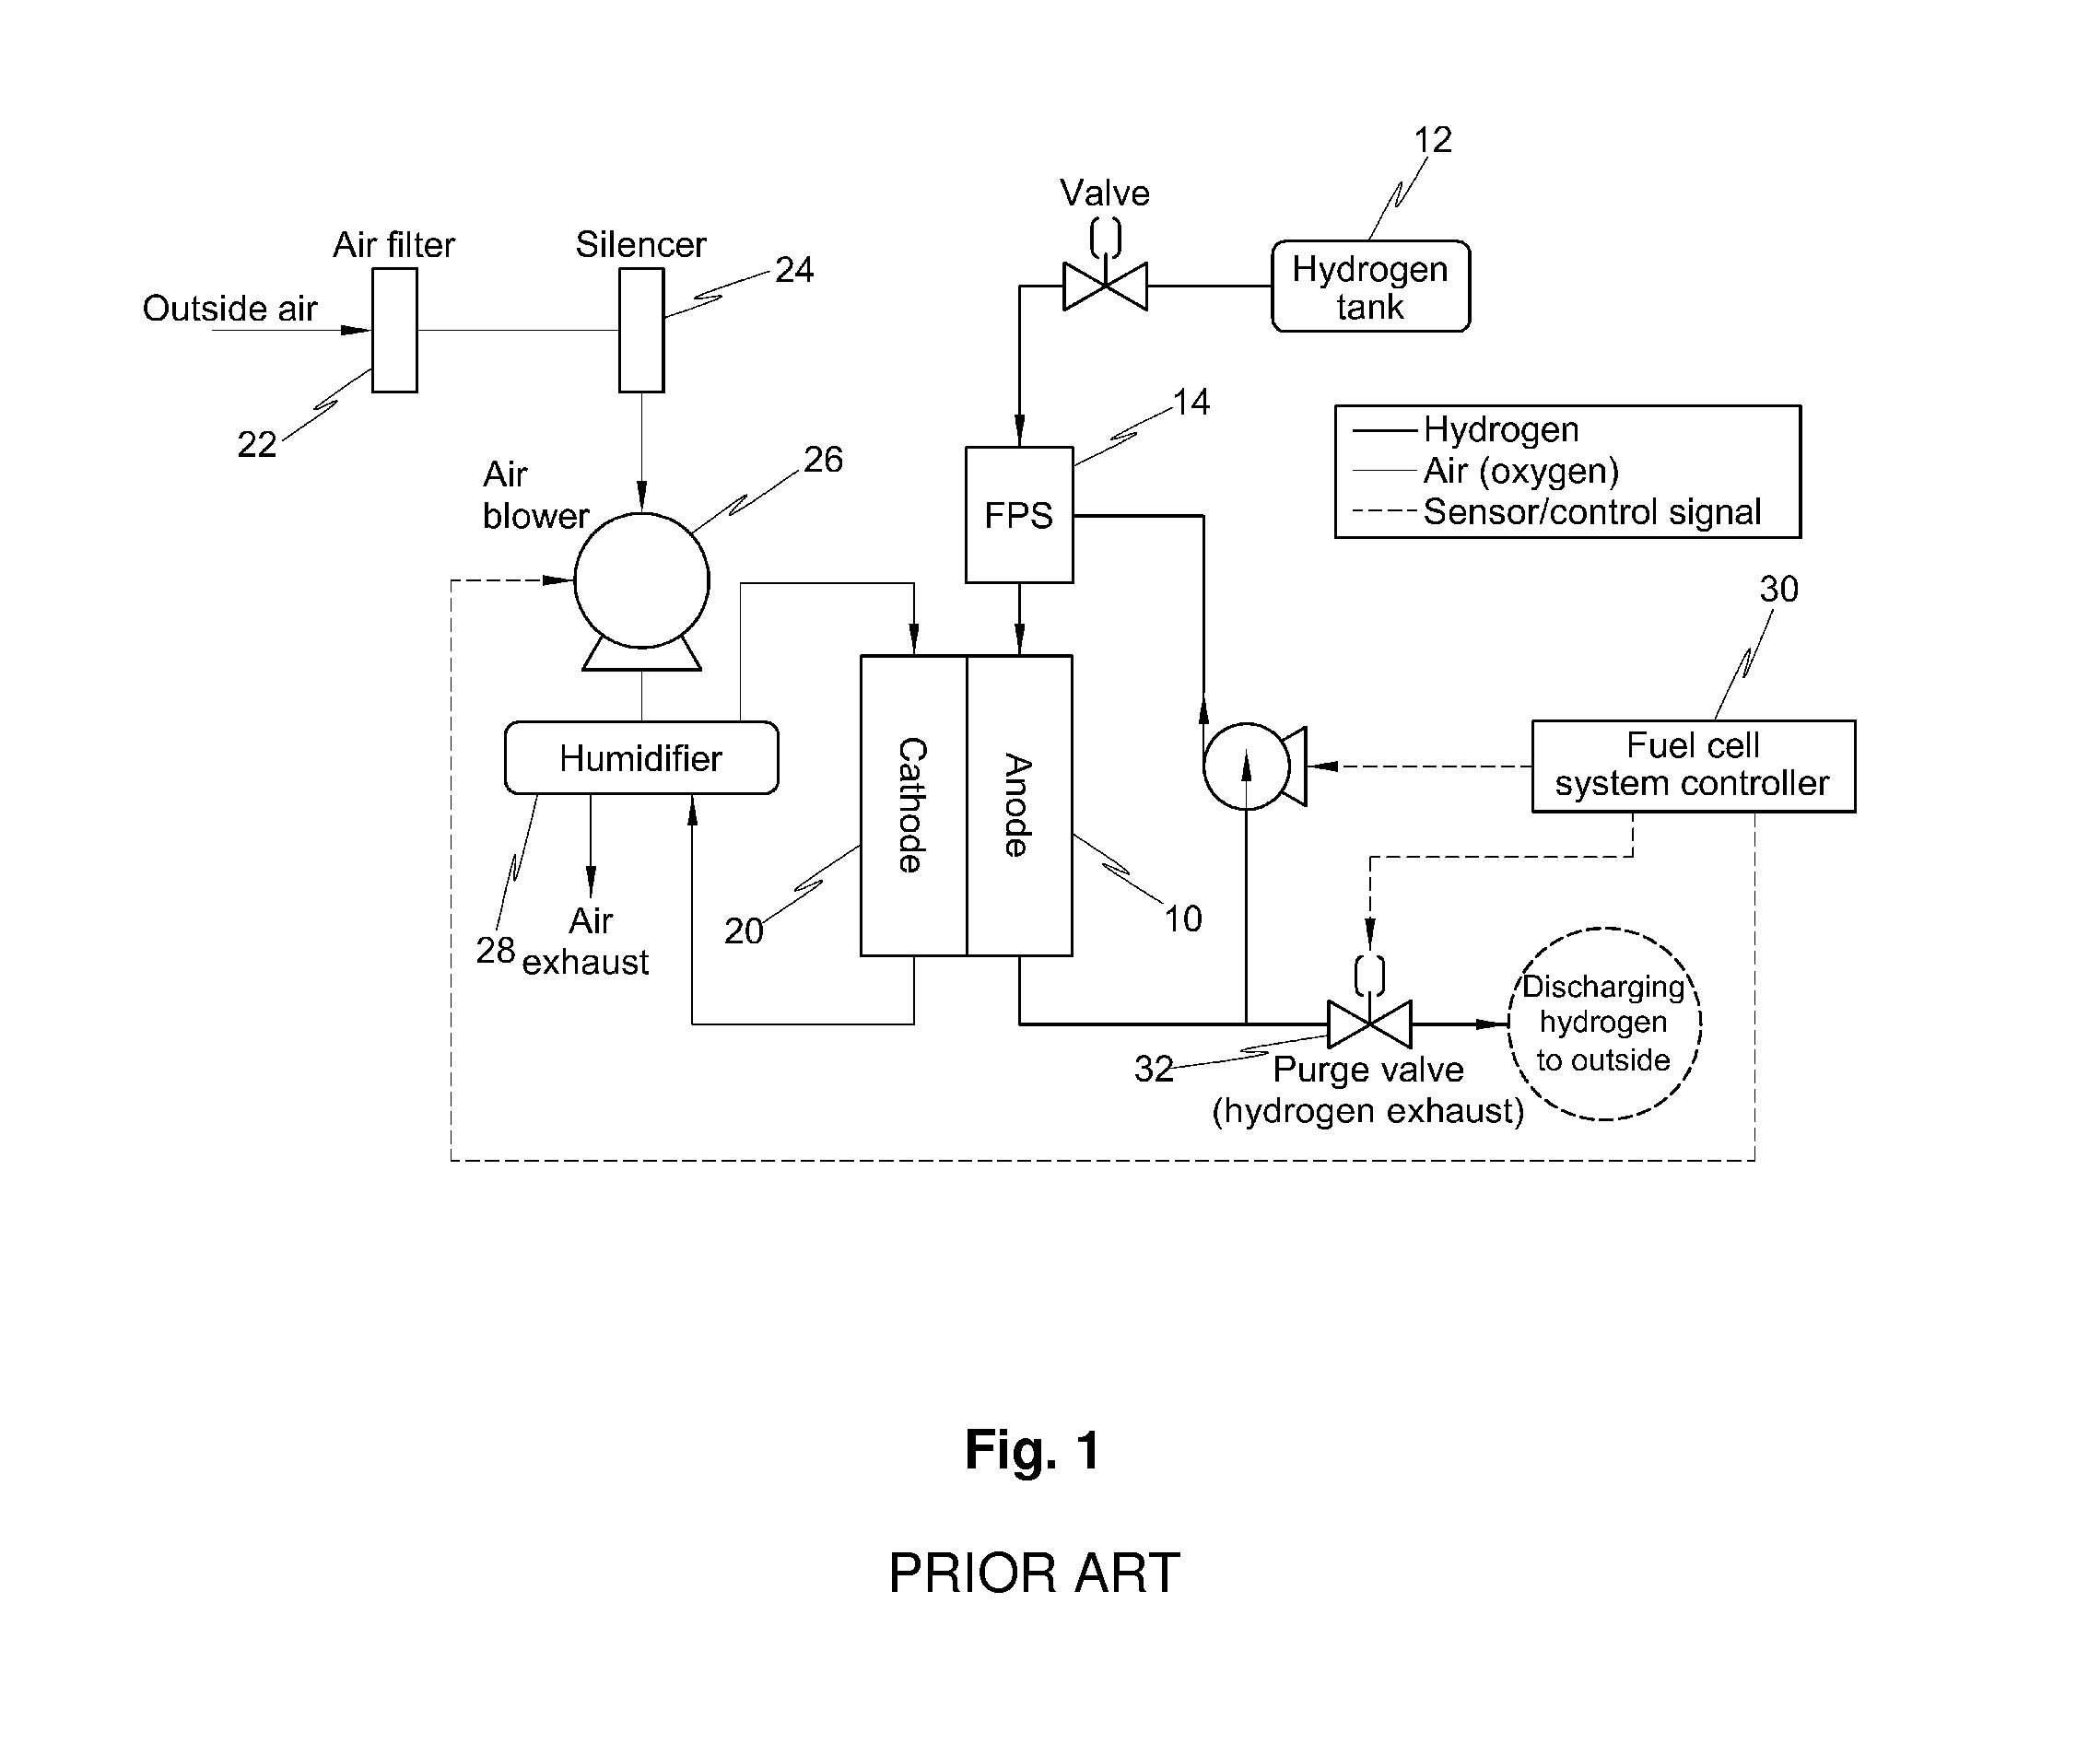 Method for removing residual water from fuel cell